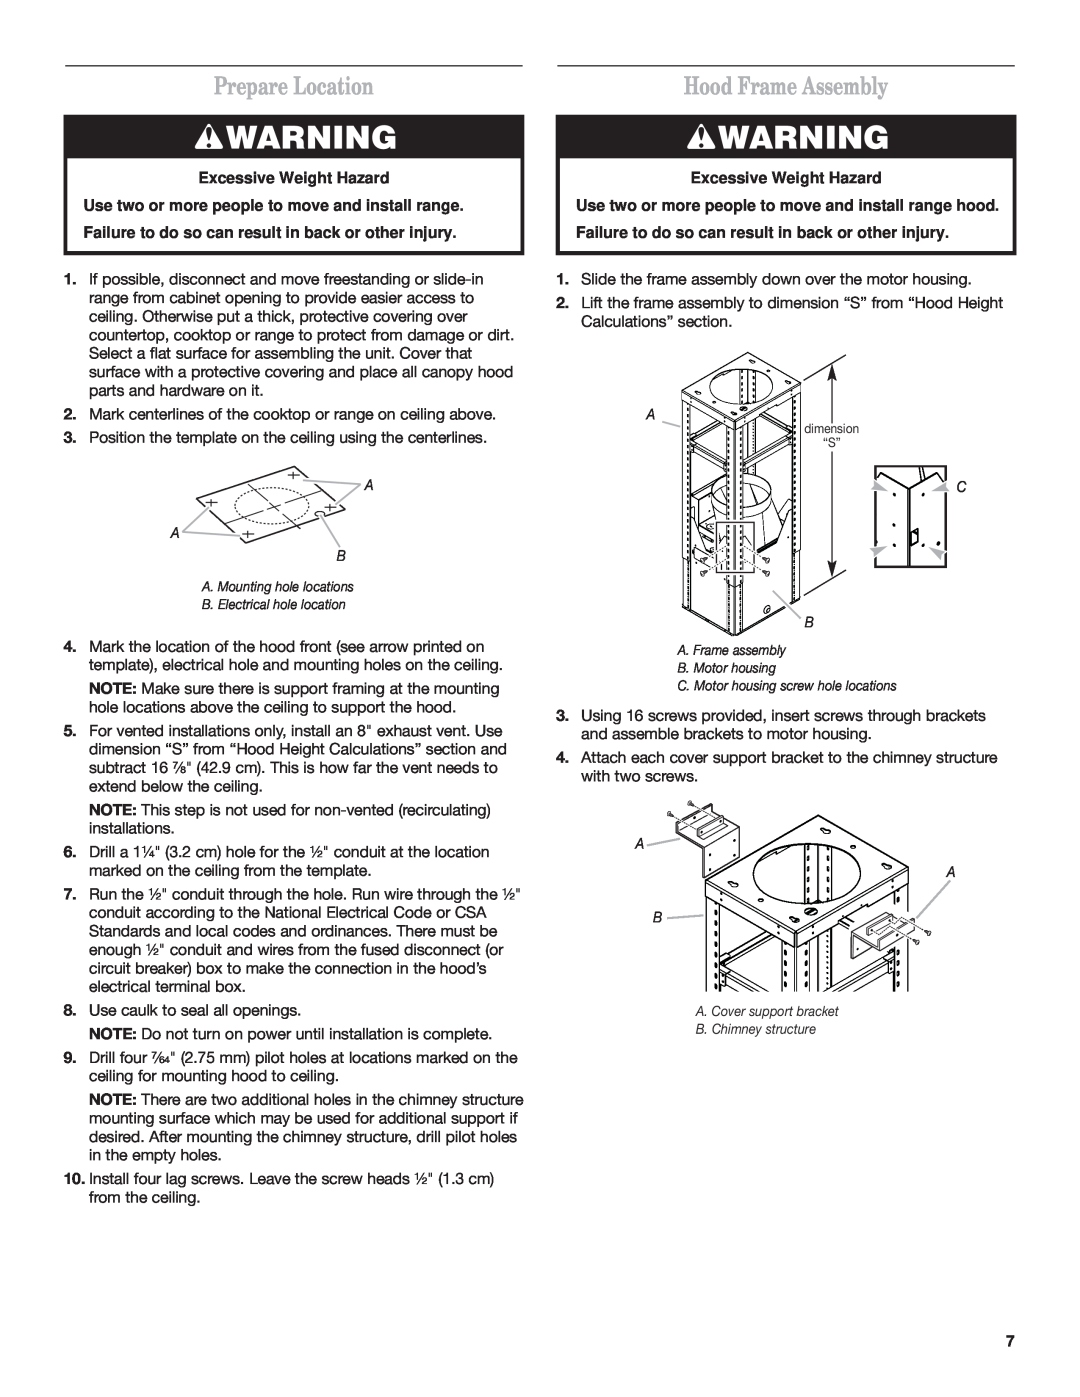 Whirlpool Ventilation Hood installation instructions Prepare Location, Hood Frame Assembly, Excessive Weight Hazard 